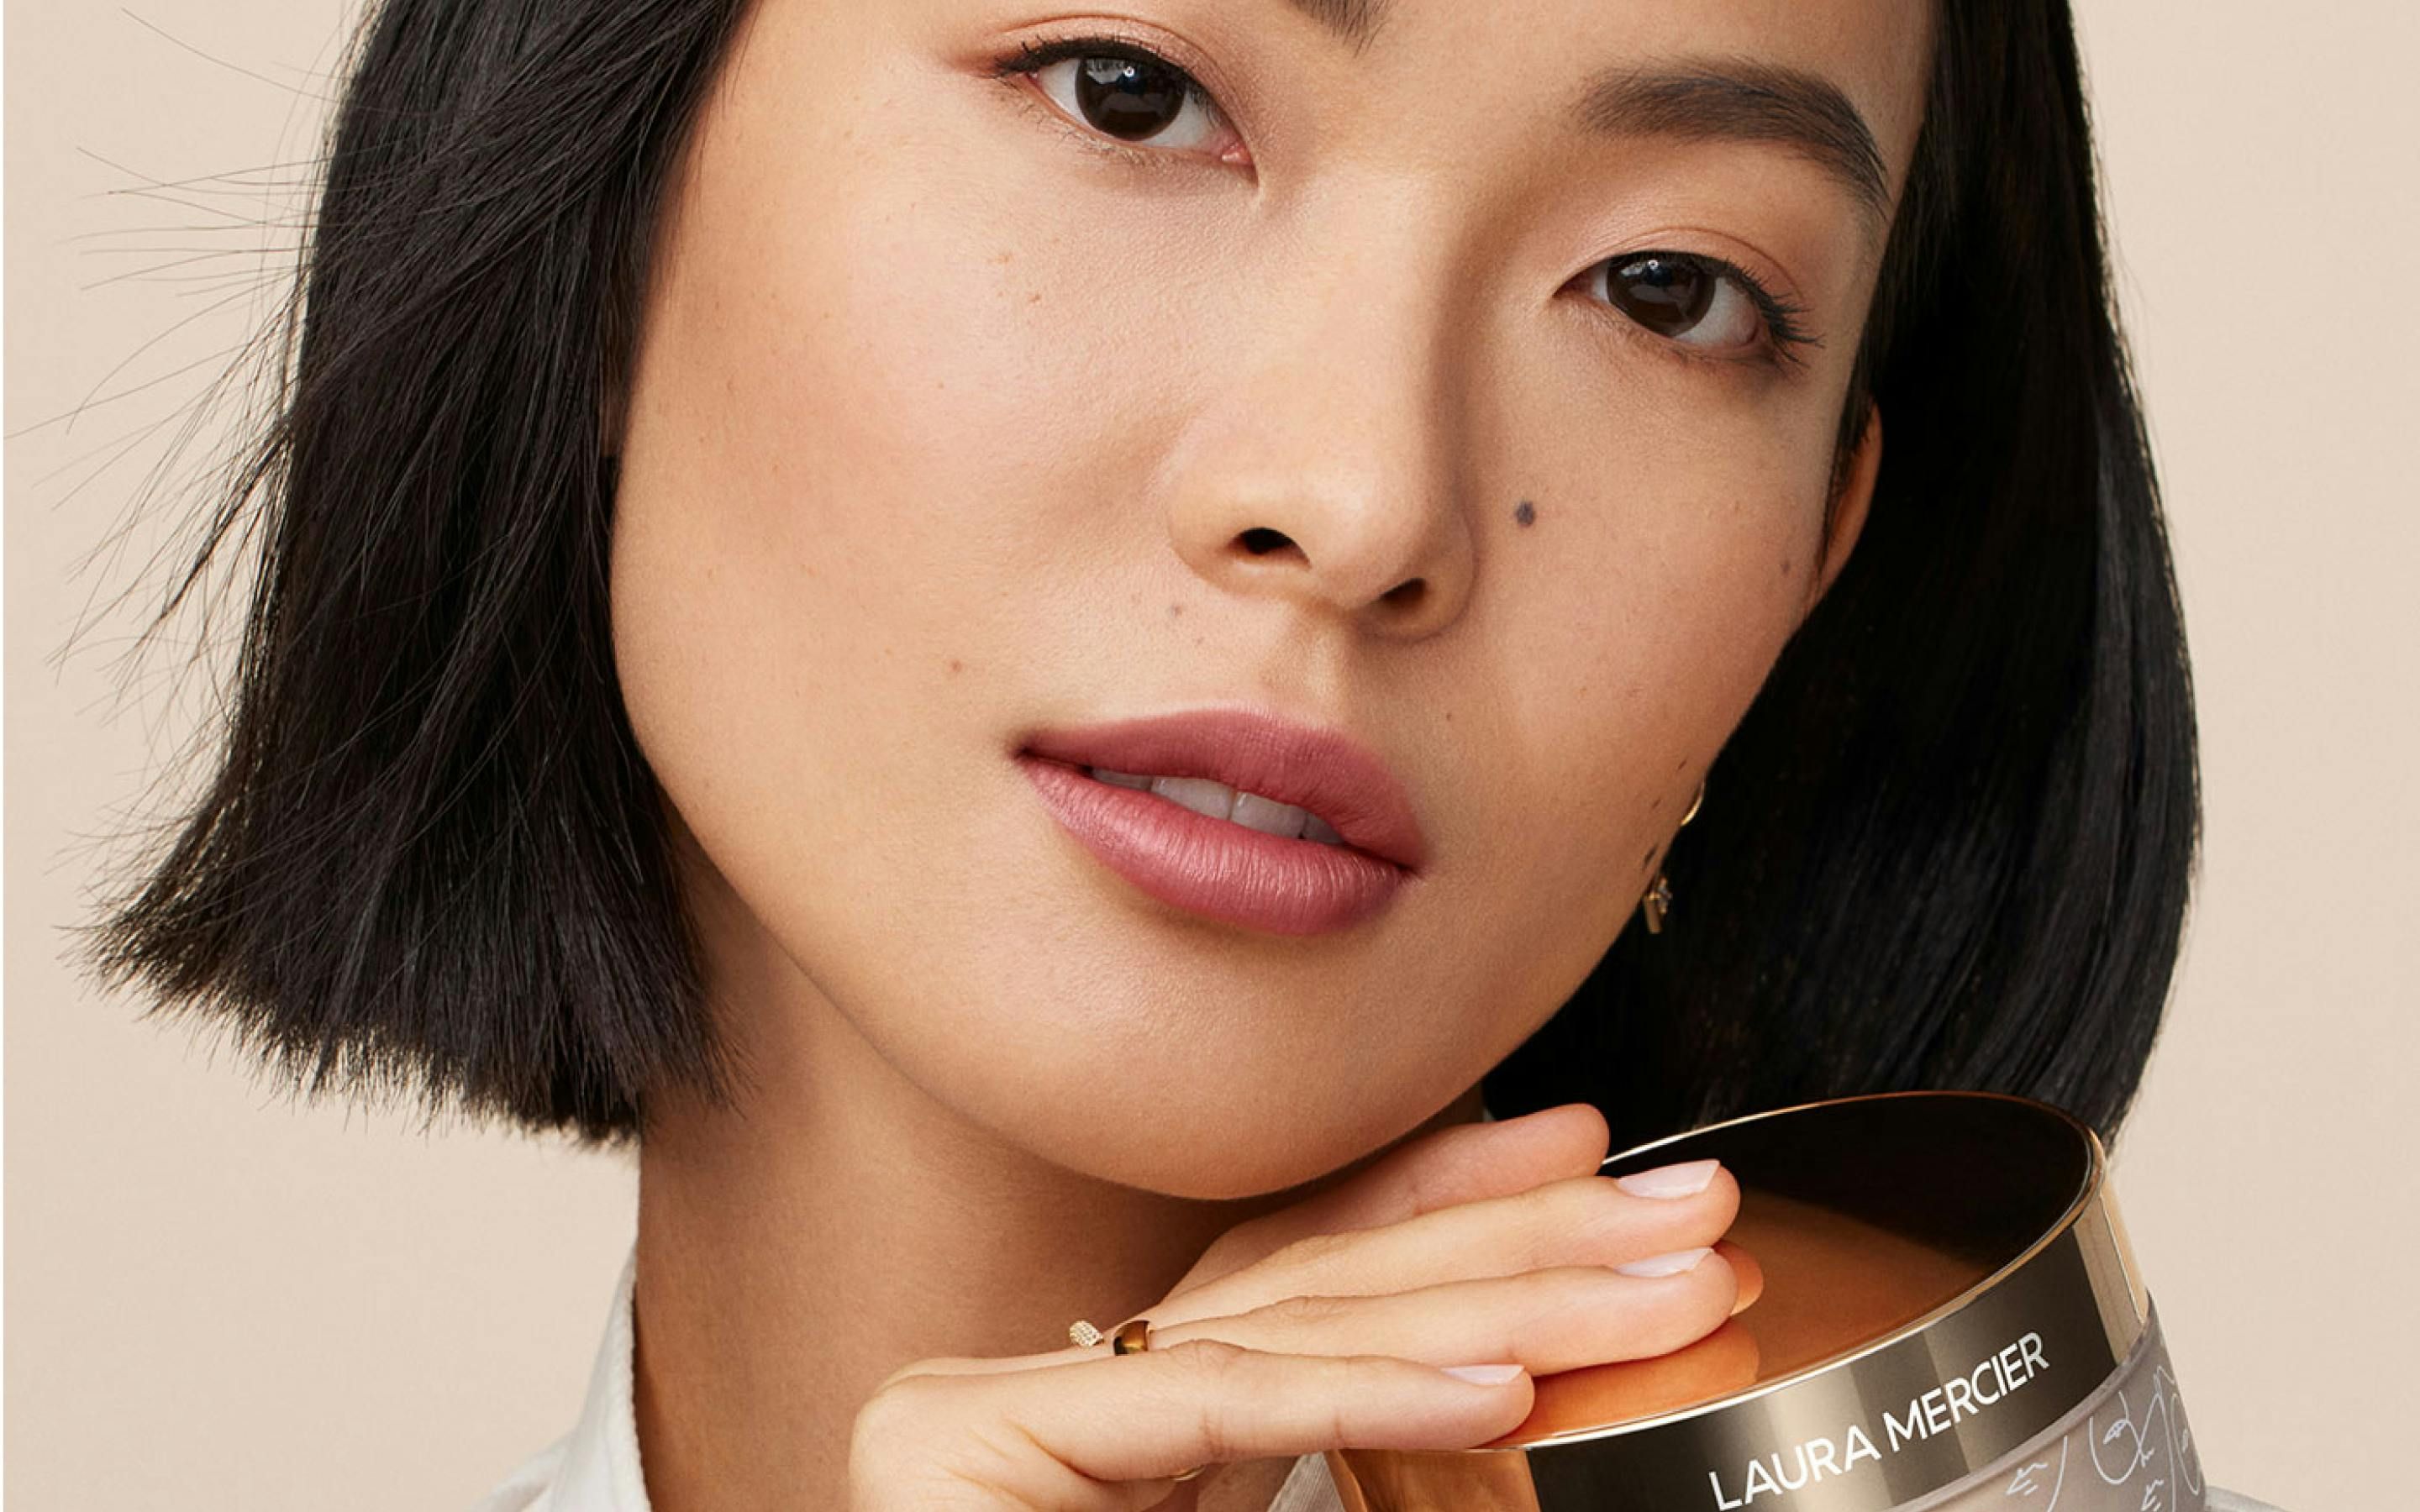 Woman posing with Laura Mercier product